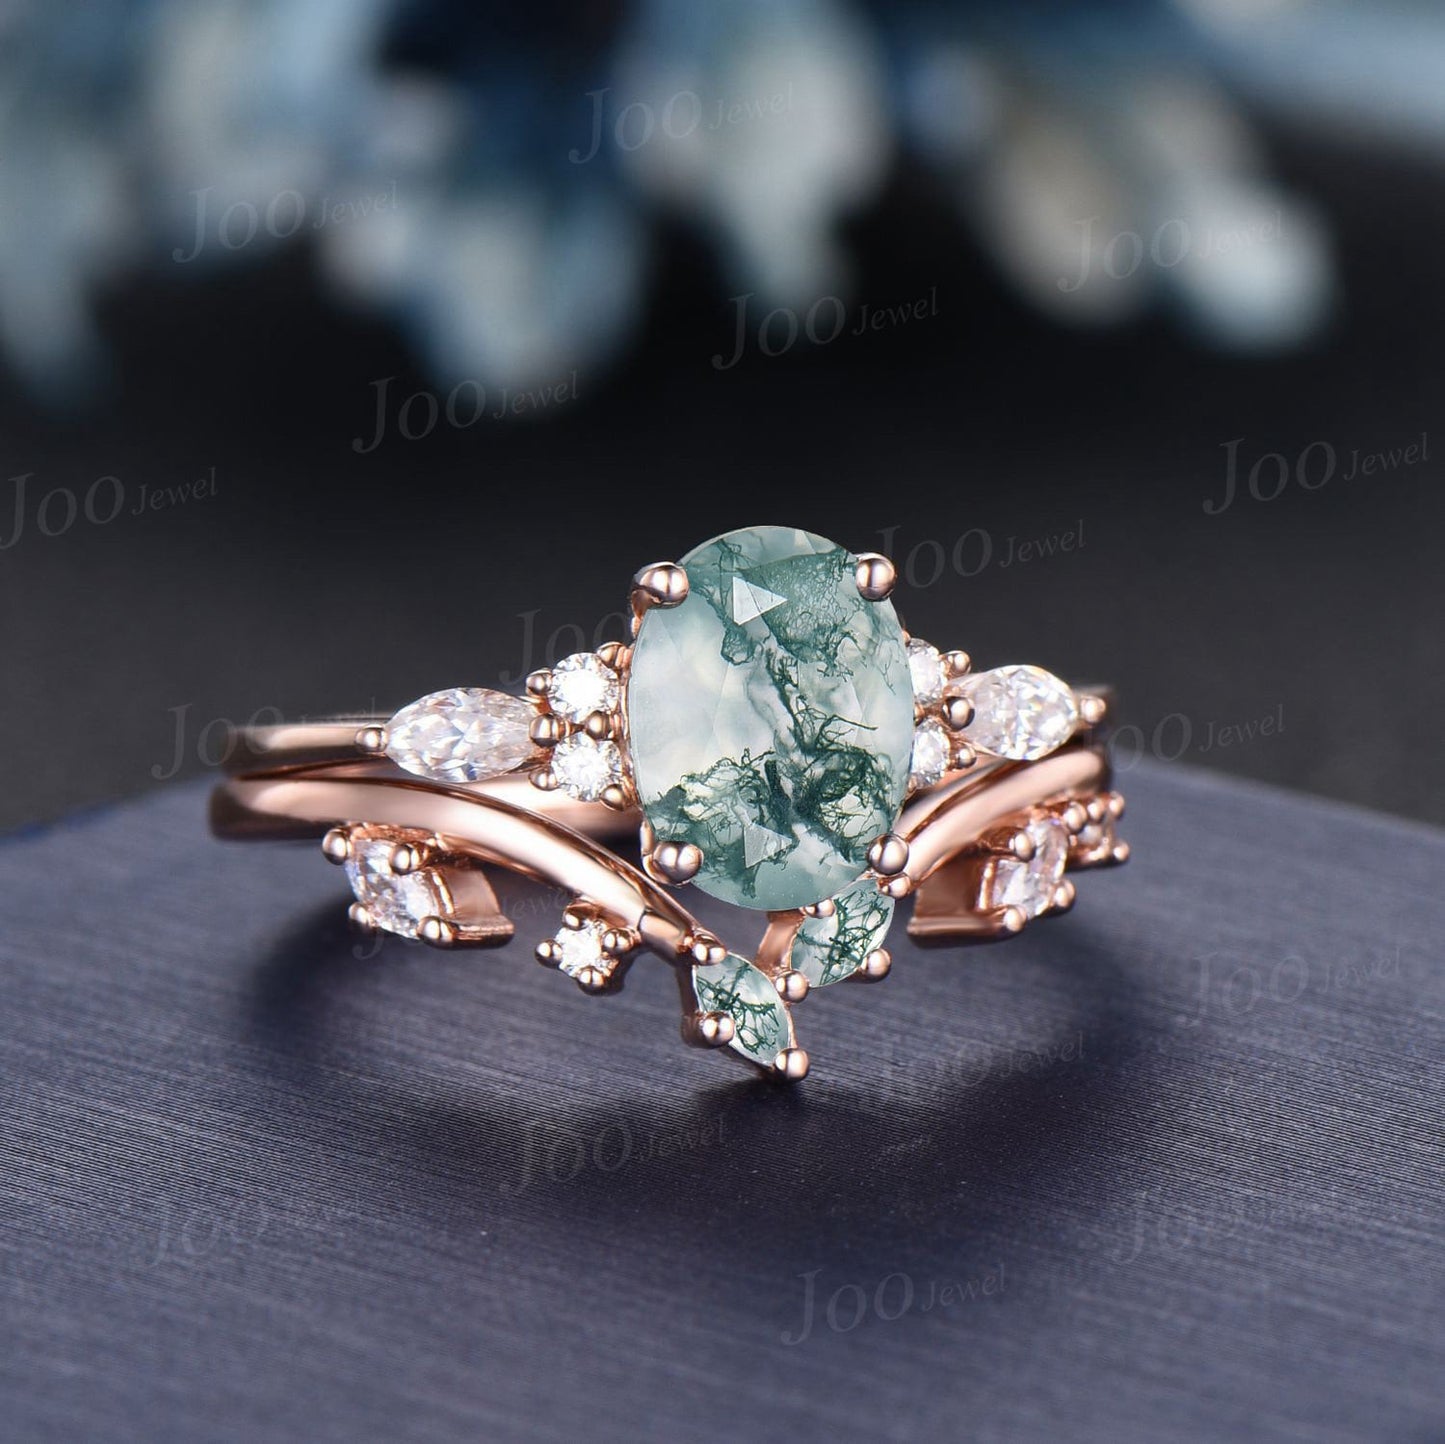 1.5ct Oval Natural Moss Agate Engagement Rings Set Rose Gold Cluster Aquatic Agate Bridal Ring Marquise Leaf Agate Moissanite Wedding Rings